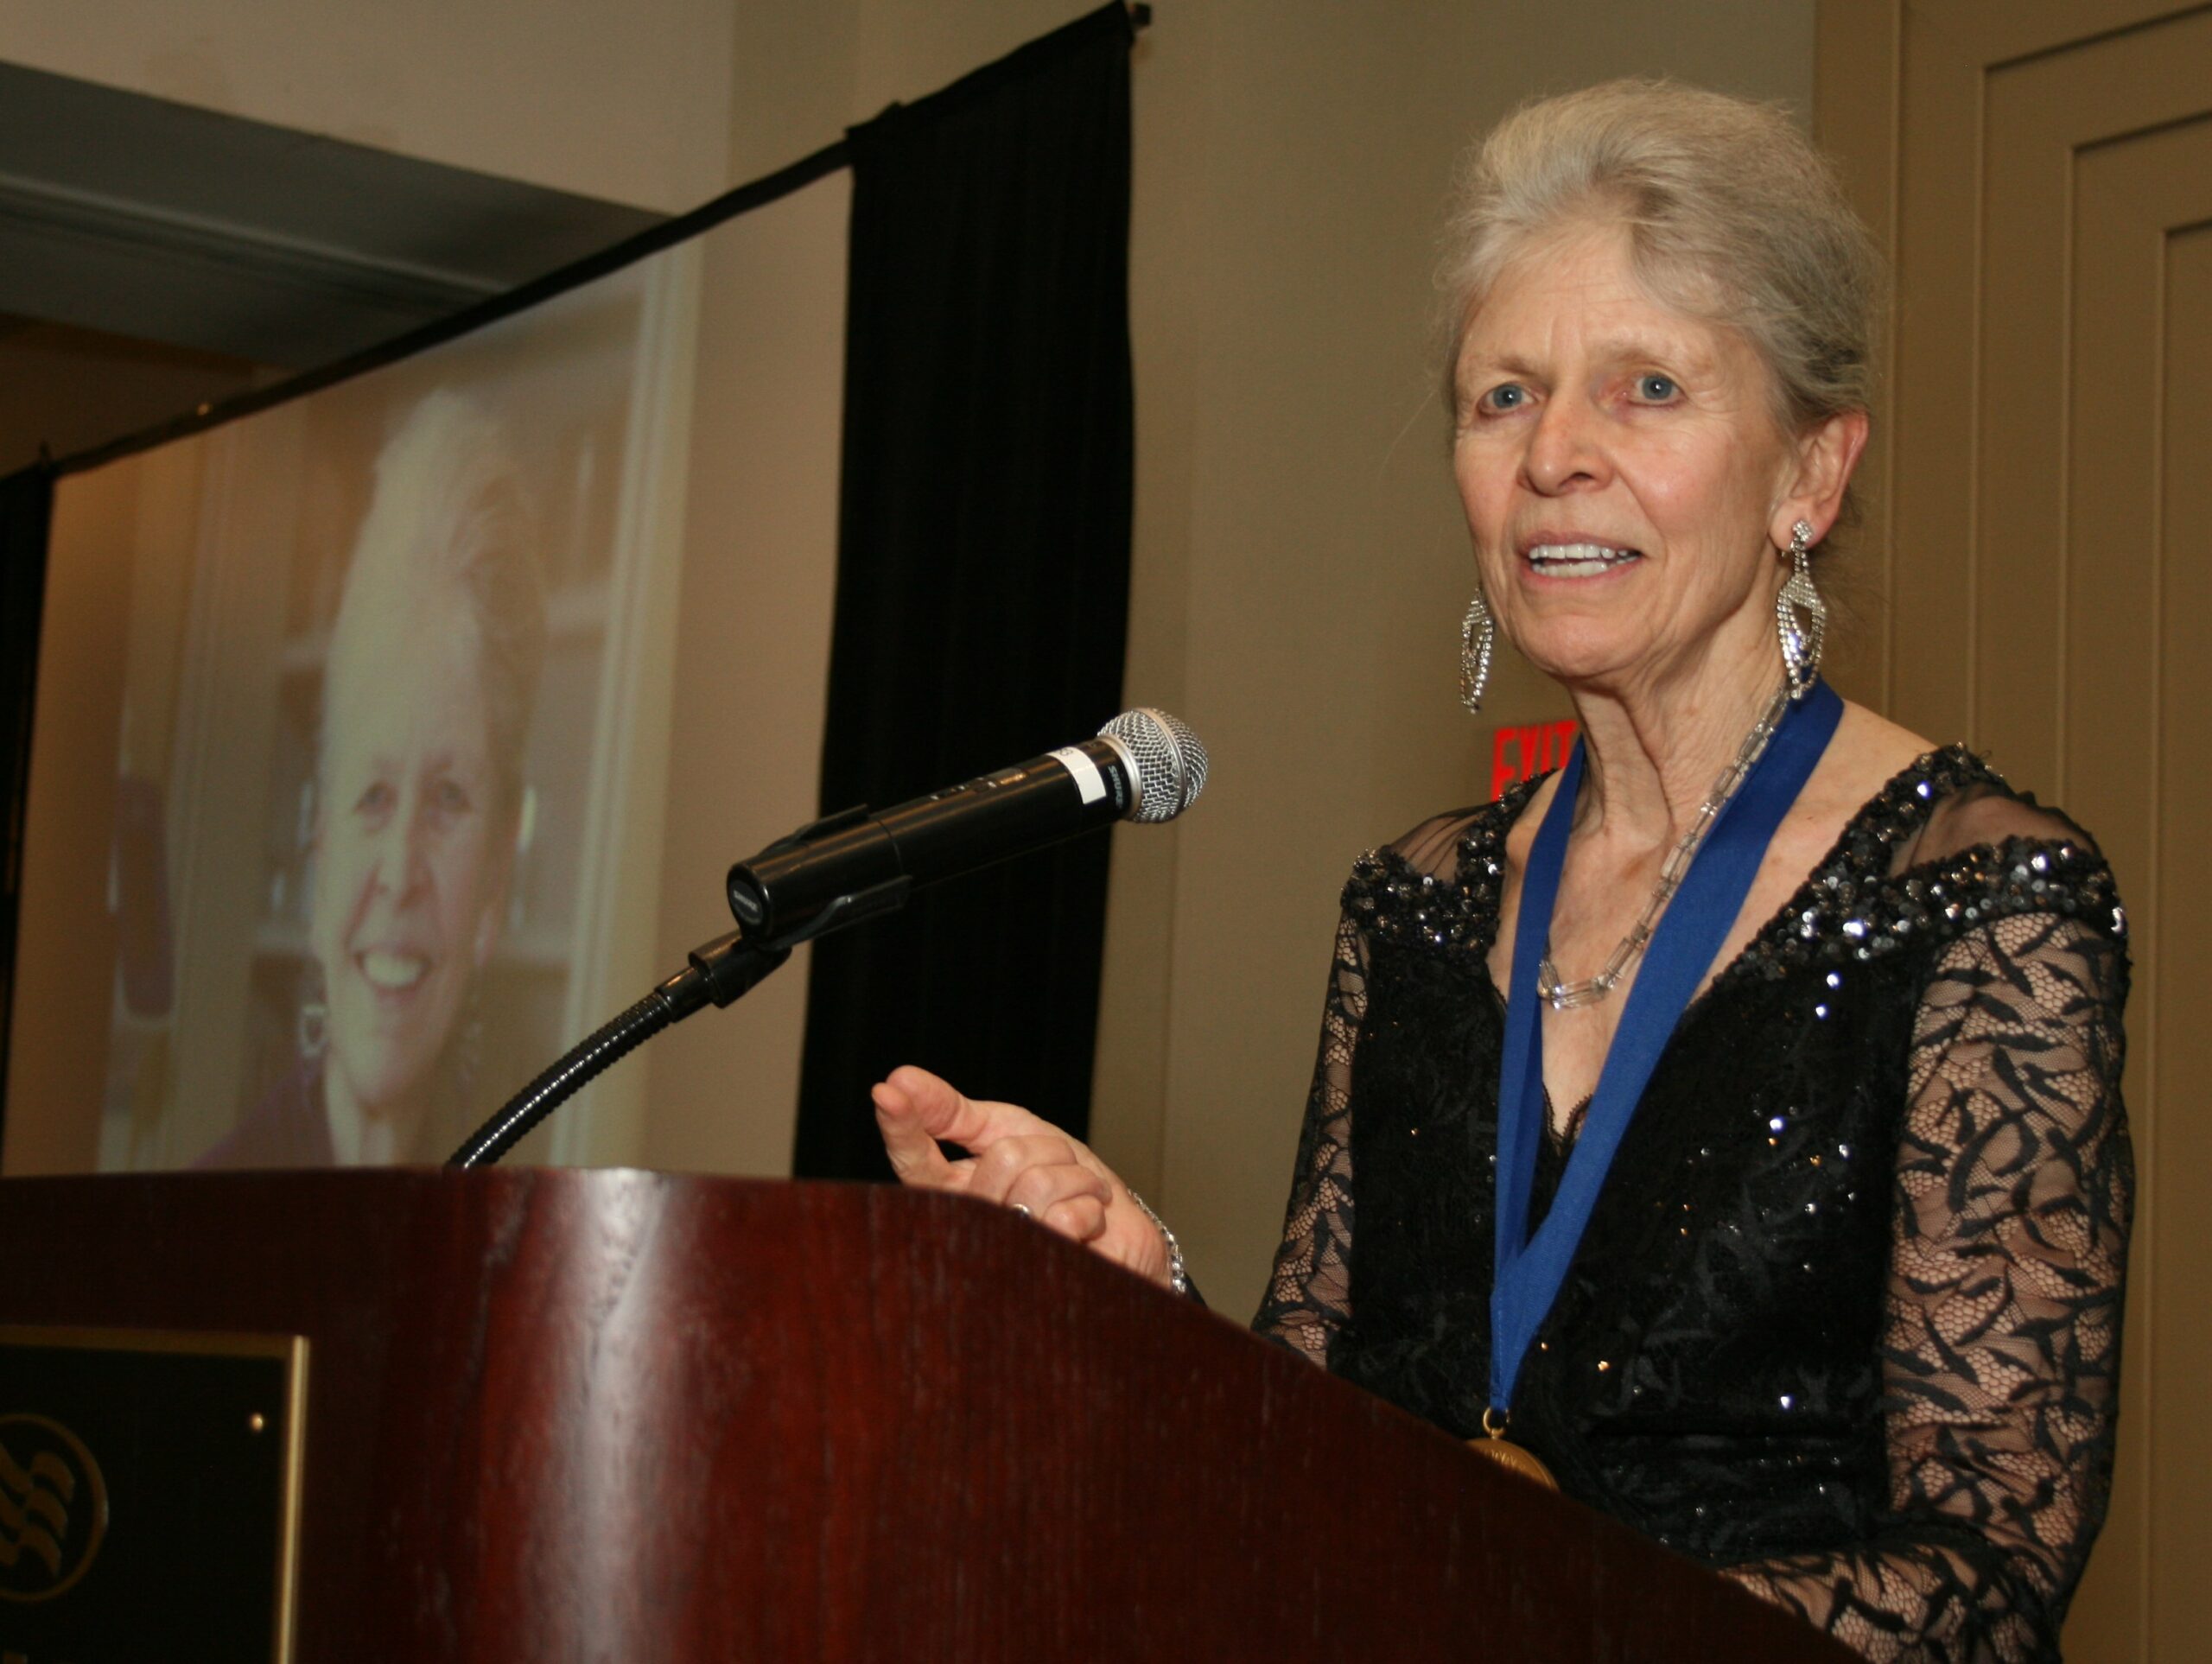 Joan Seitz, 2015 CT Medal of Science